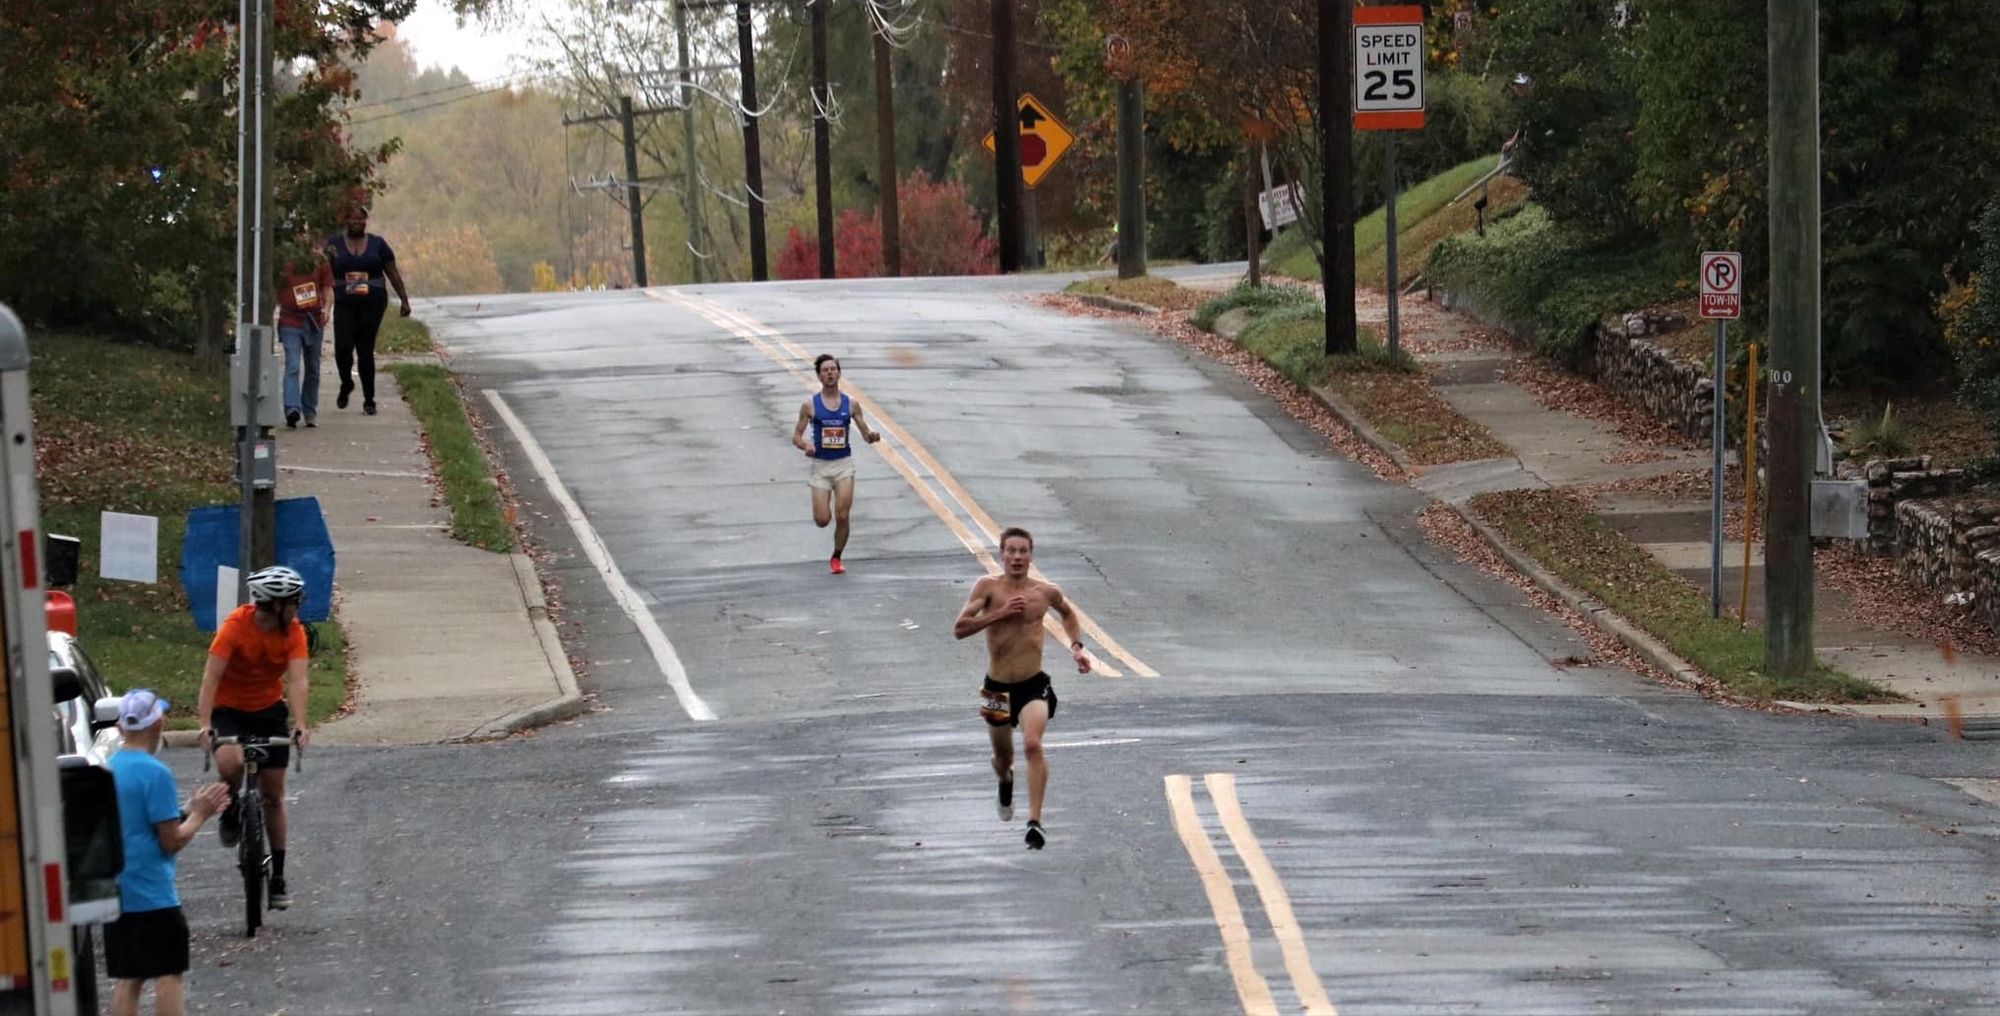 Bobby Mack, Michelle Lutz win Westerwood 5K; Claire McDowell takes Women's Only 5K; Nidas go 1-2 in Raleigh